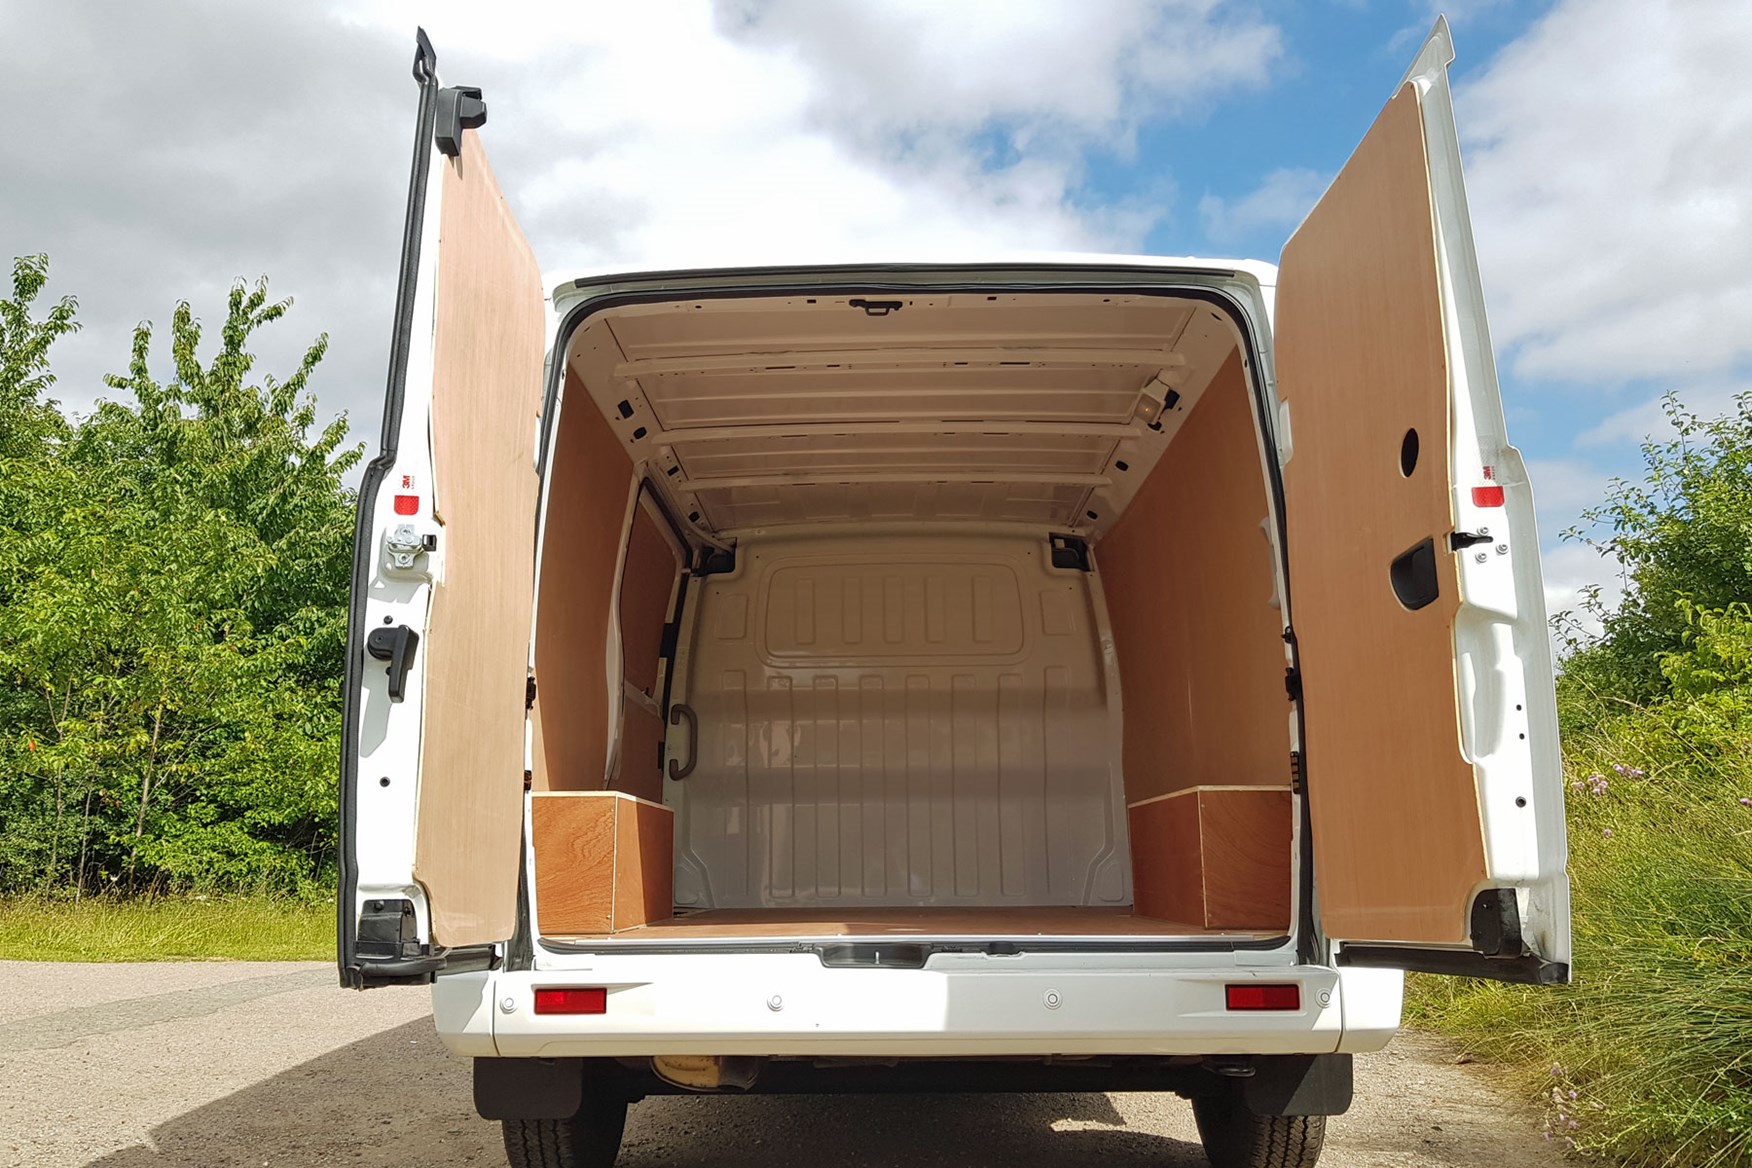 LDV V80 dimensions and payload - 2019 facelift, view of load area through rear doors